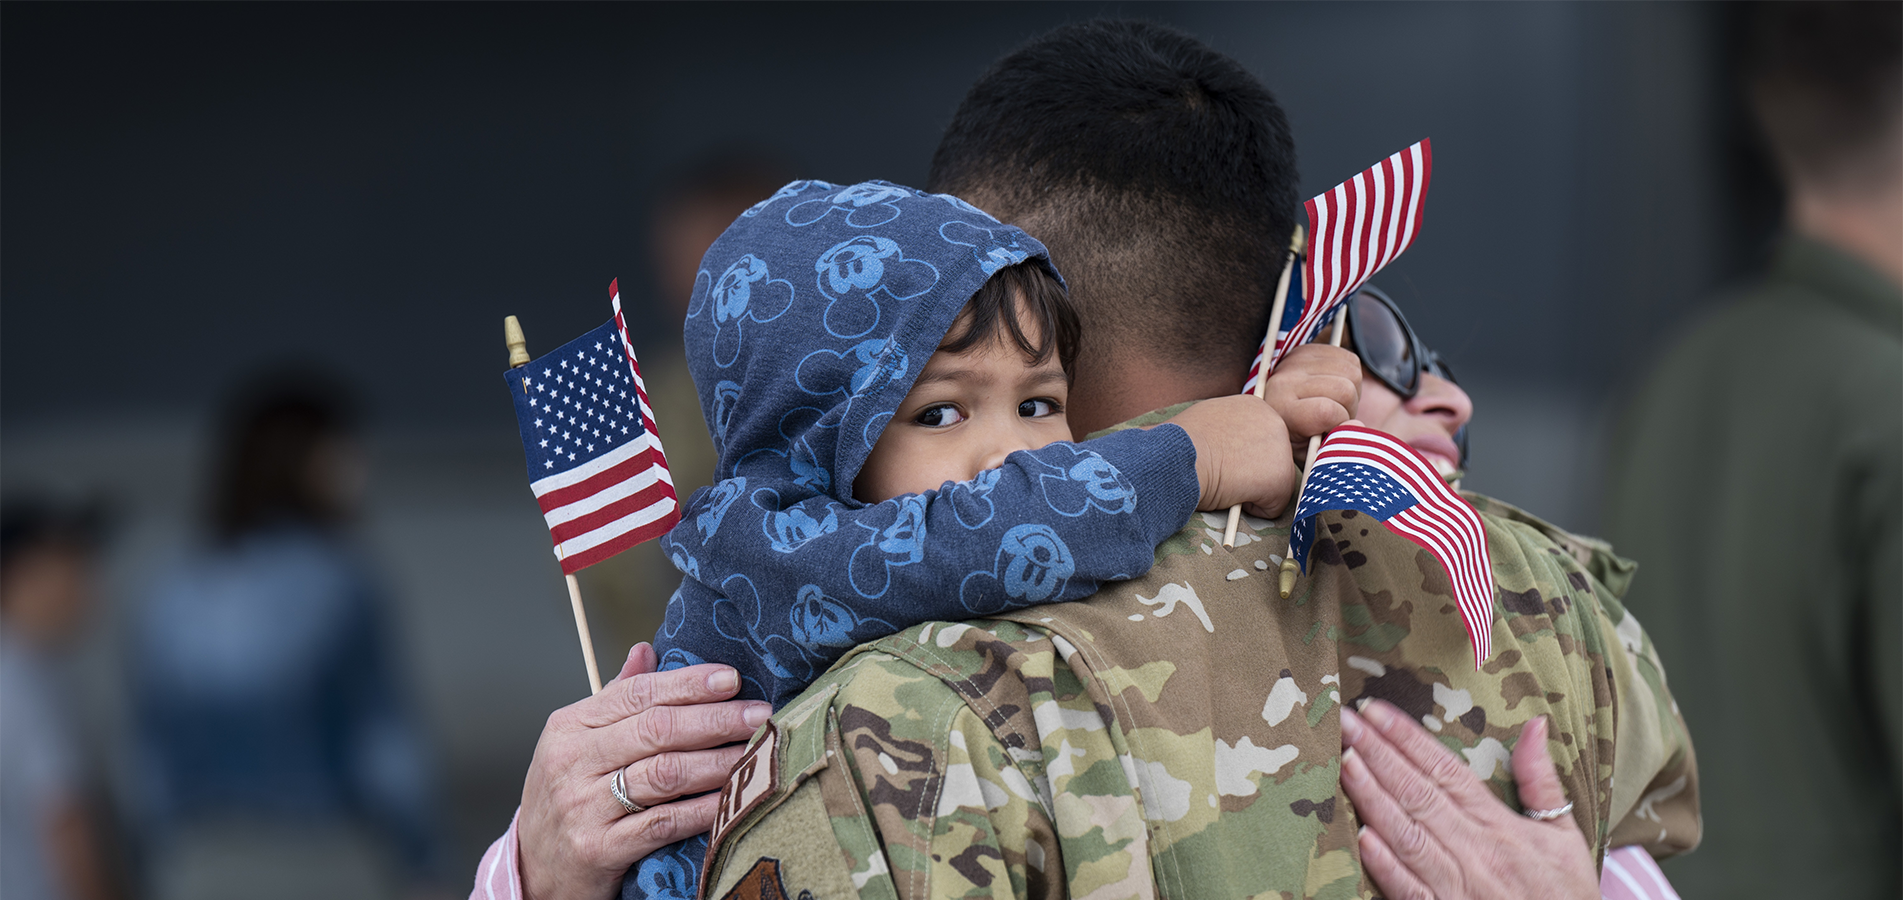 Little boy hugging his father who is in military fatigues